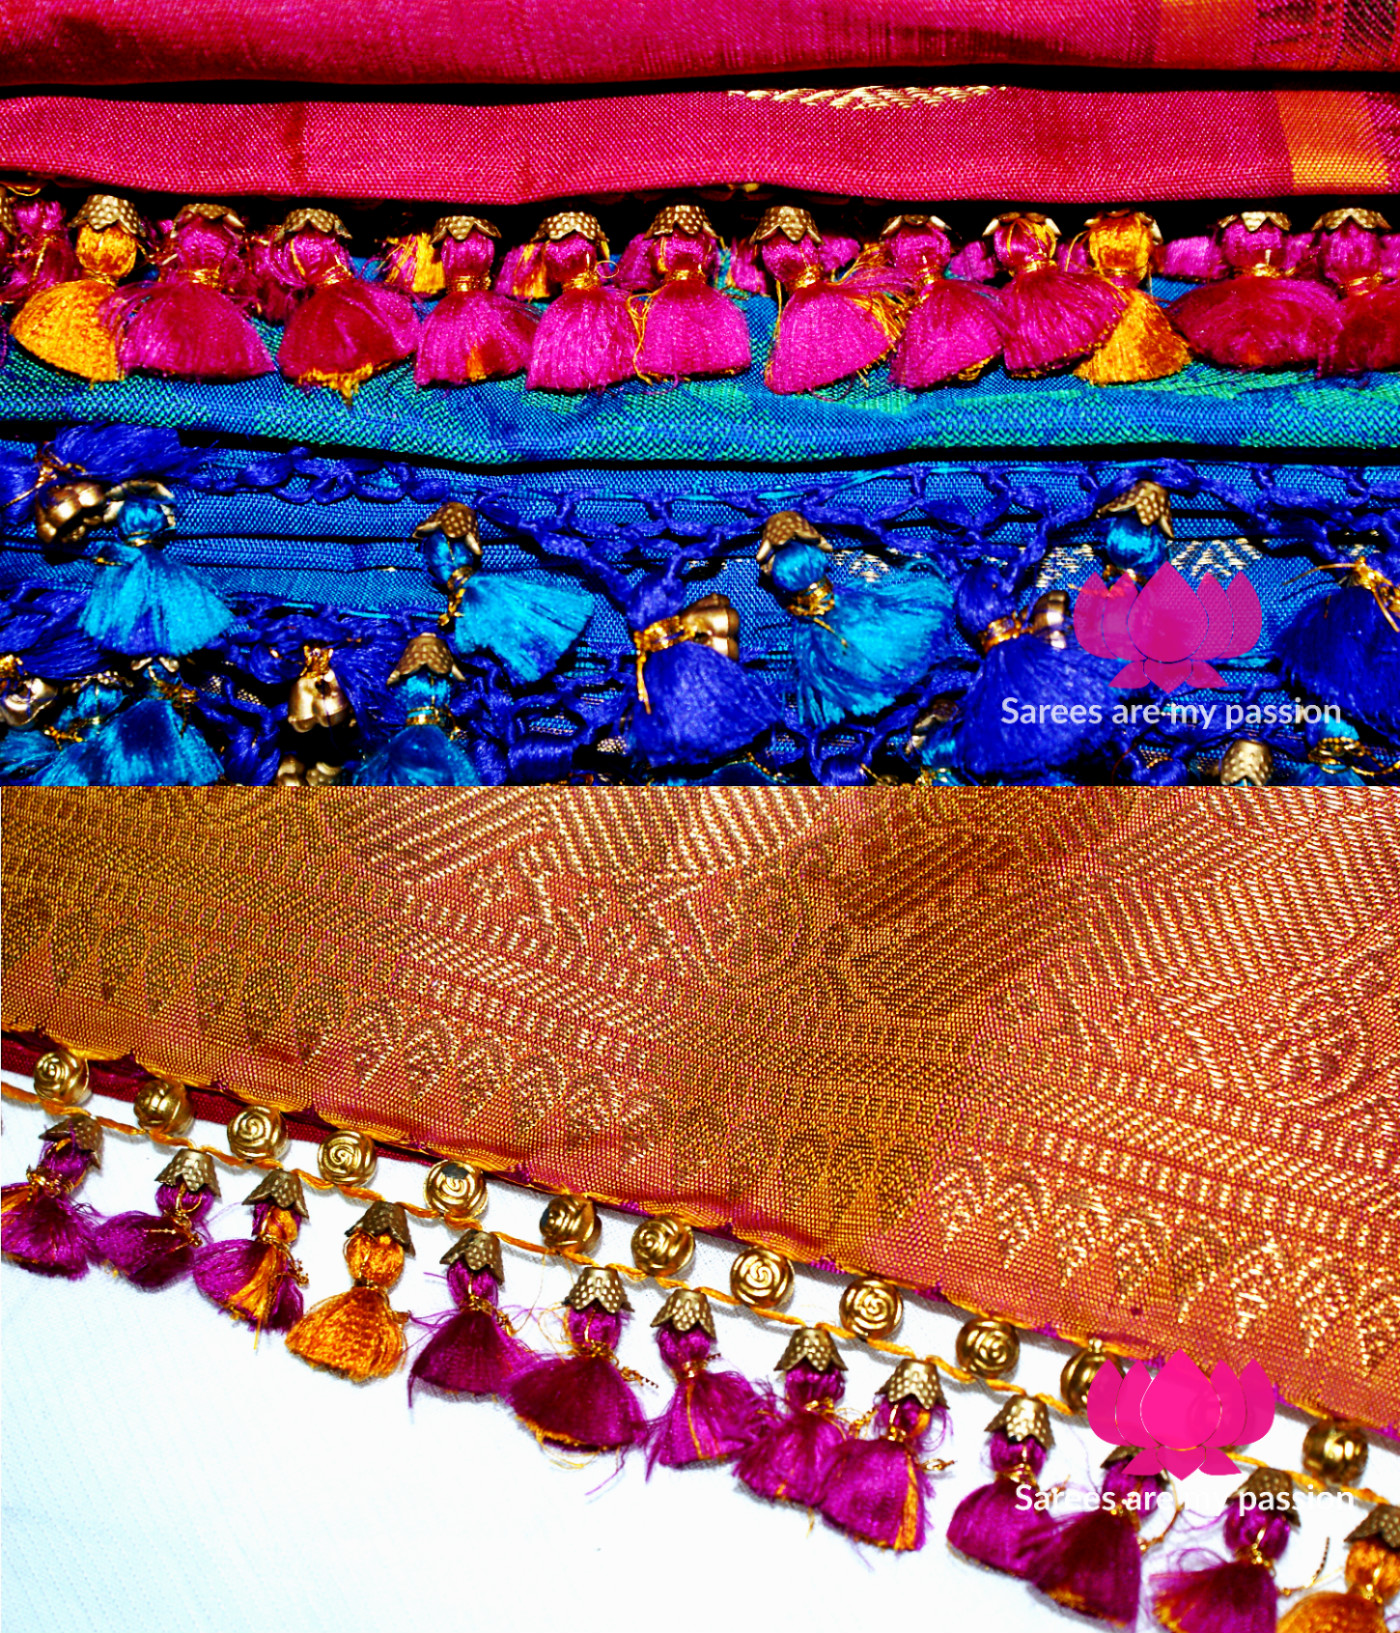 My First Saree Tassels - Sarees are my passion